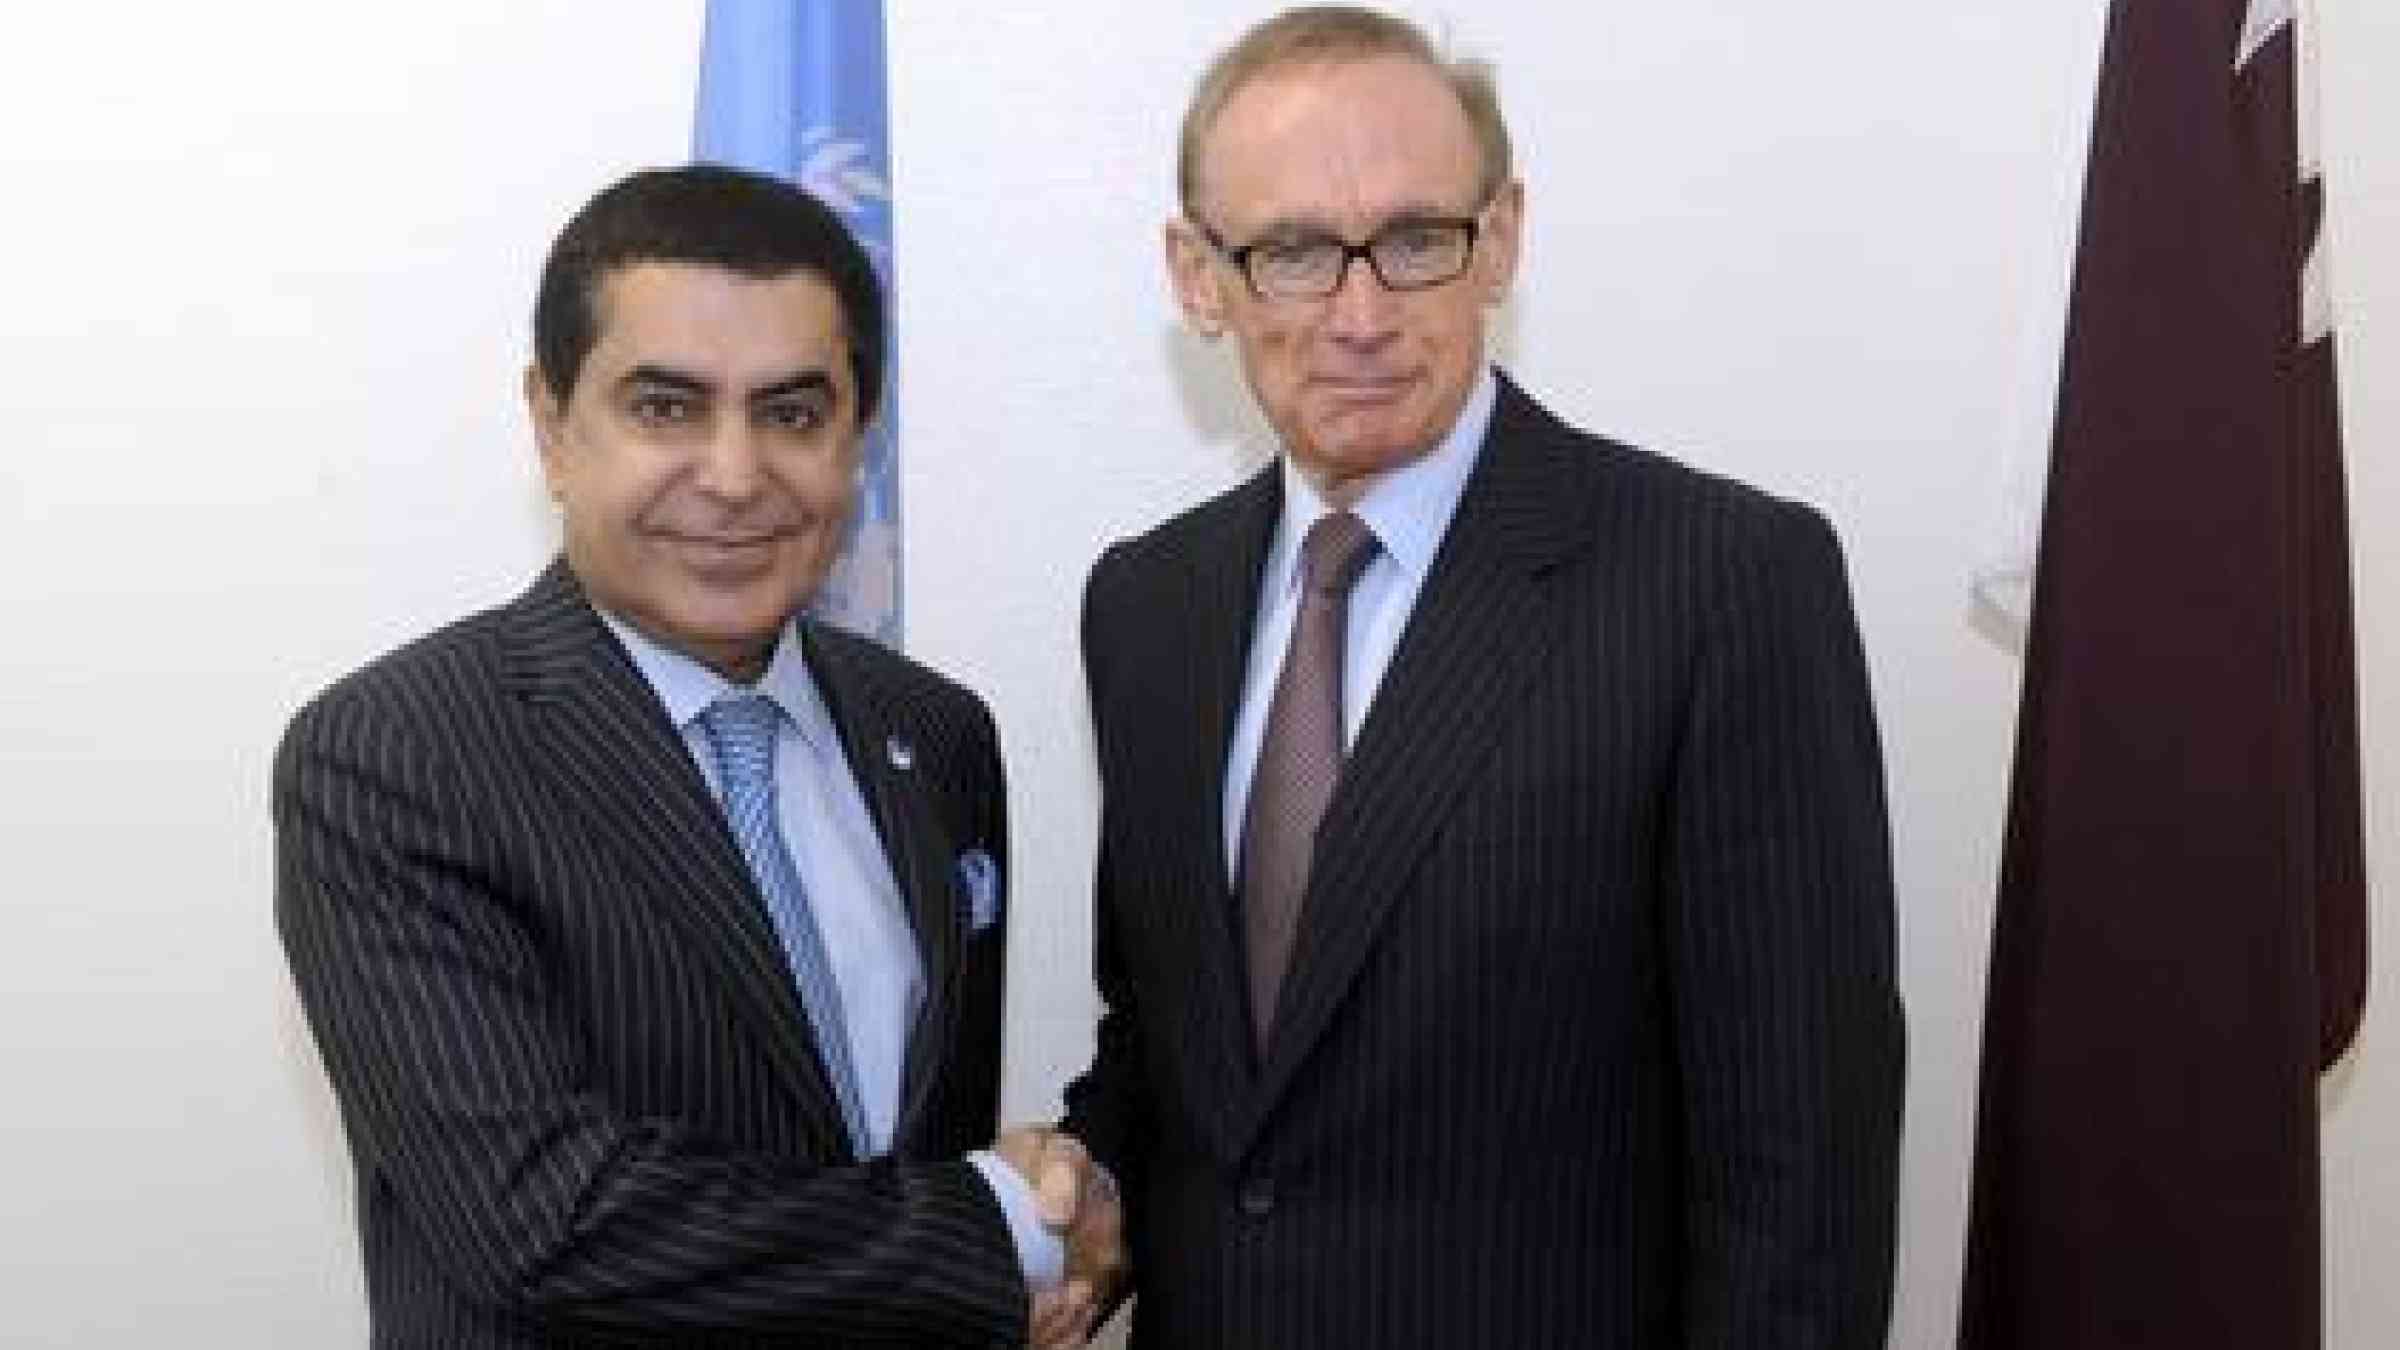 From left: Nassir Abdulaziz Al-Nasser, President of the sixty-sixth session of the General Assembly, meets with Bob Carr, Minister for Foreign Affairs of Australia prior to attending the UN General Assembly Thematic Debate on Disaster Risk Reduction.